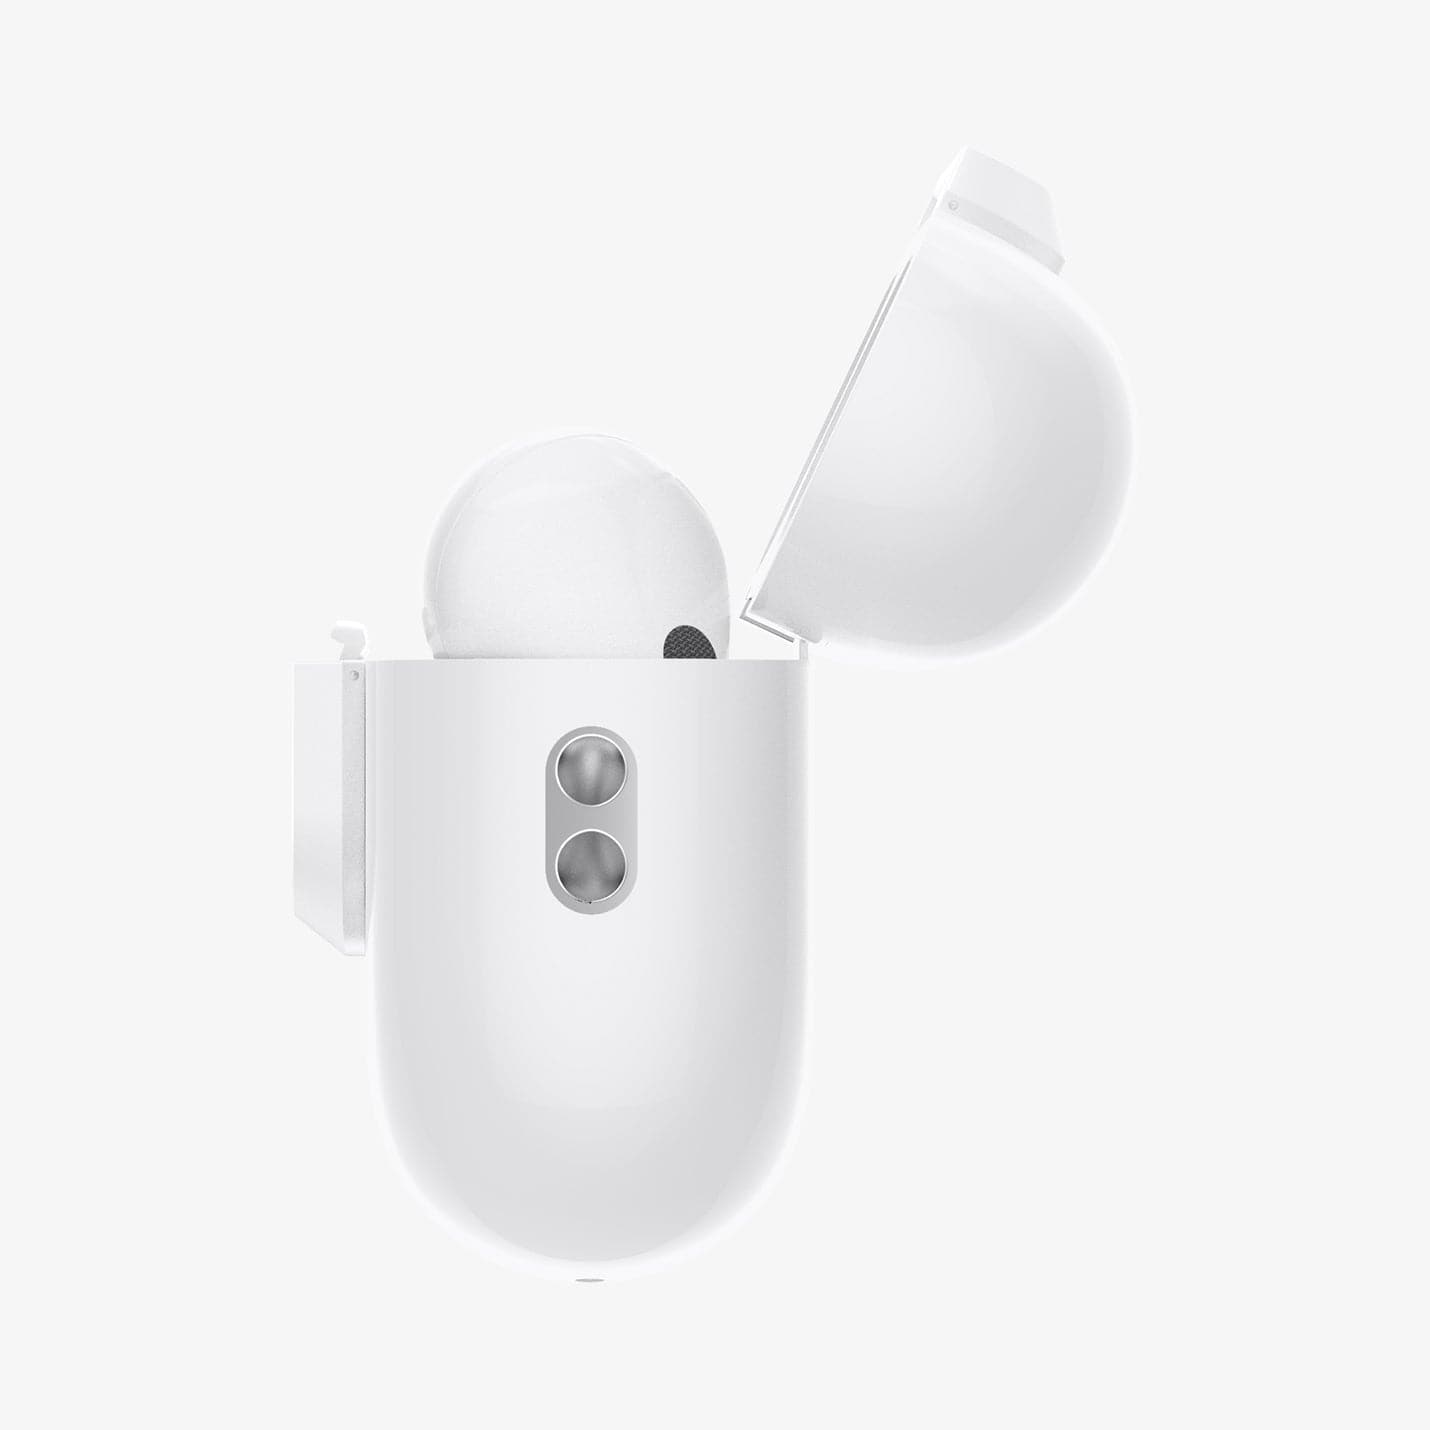 ASD06090 - Apple AirPods Pro / AirPods Pro 2 Case Lock Fit in white showing the side with top open and AirPods inside